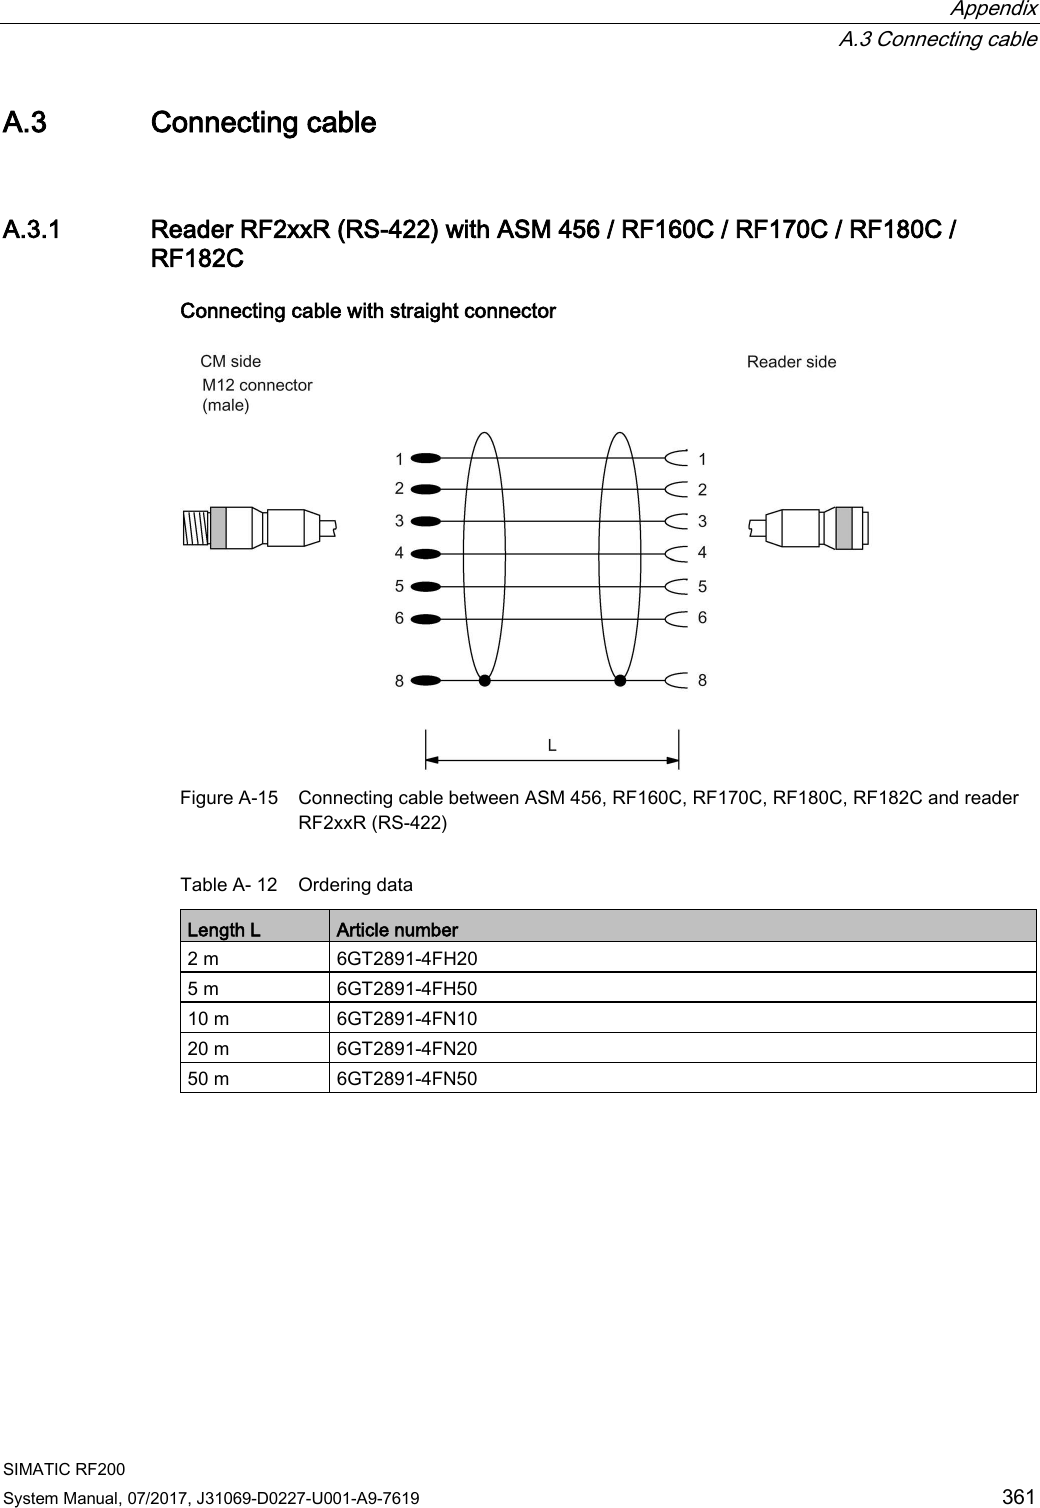  Appendix  A.3 Connecting cable SIMATIC RF200 System Manual, 07/2017, J31069-D0227-U001-A9-7619 361 A.3 Connecting cable A.3.1 Reader RF2xxR (RS-422) with ASM 456 / RF160C / RF170C / RF180C / RF182C Connecting cable with straight connector  Figure A-15 Connecting cable between ASM 456, RF160C, RF170C, RF180C, RF182C and reader RF2xxR (RS-422) Table A- 12 Ordering data Length L Article number 2 m 6GT2891-4FH20 5 m 6GT2891-4FH50 10 m 6GT2891-4FN10 20 m 6GT2891-4FN20 50 m 6GT2891-4FN50    